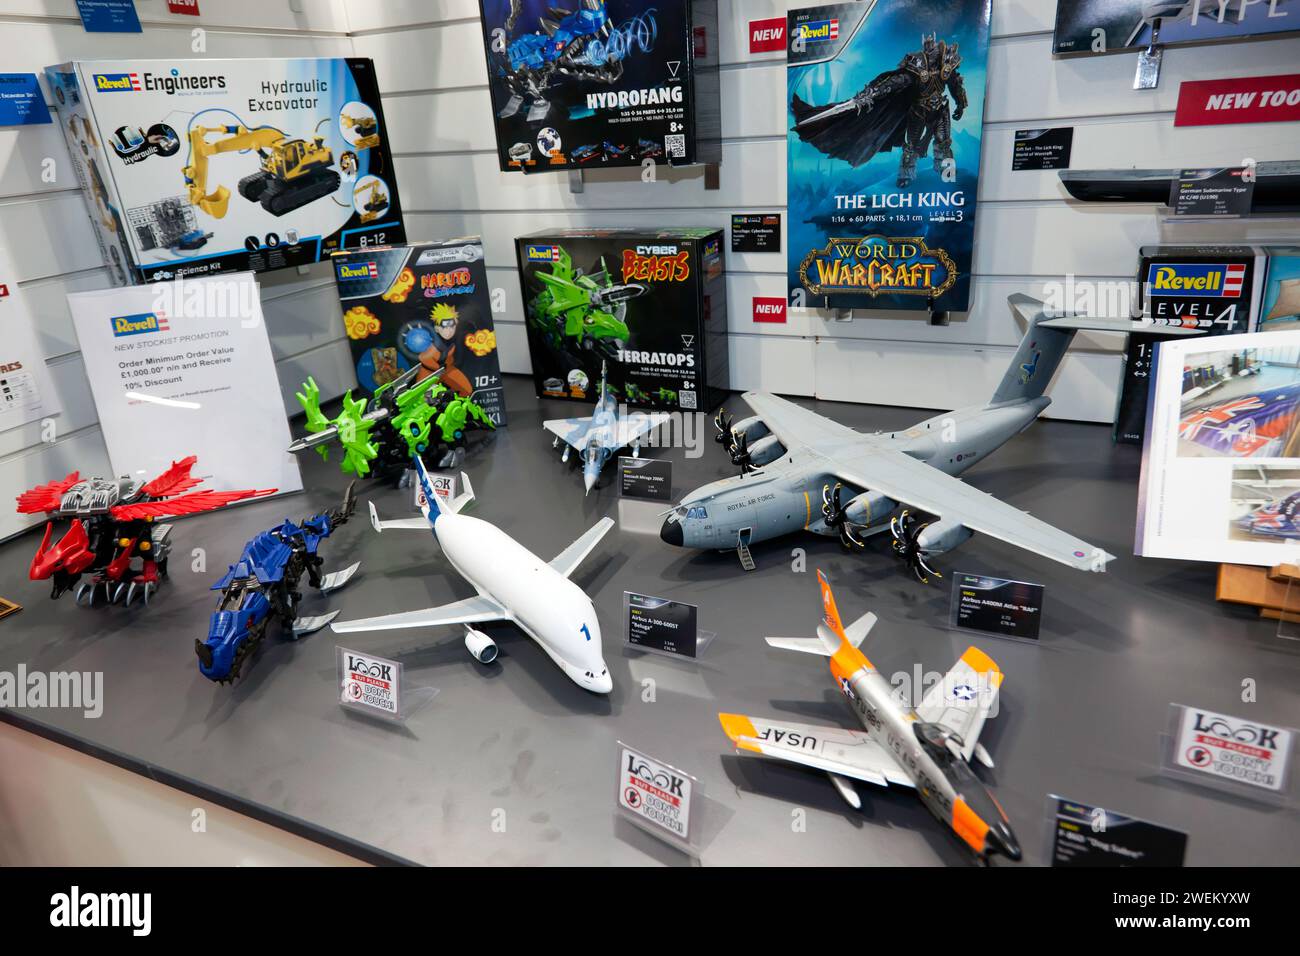 Model Construction Kits and Warcraft Products on the Revell Stand, at the 2024 Toy Fair, Olympia Stock Photo